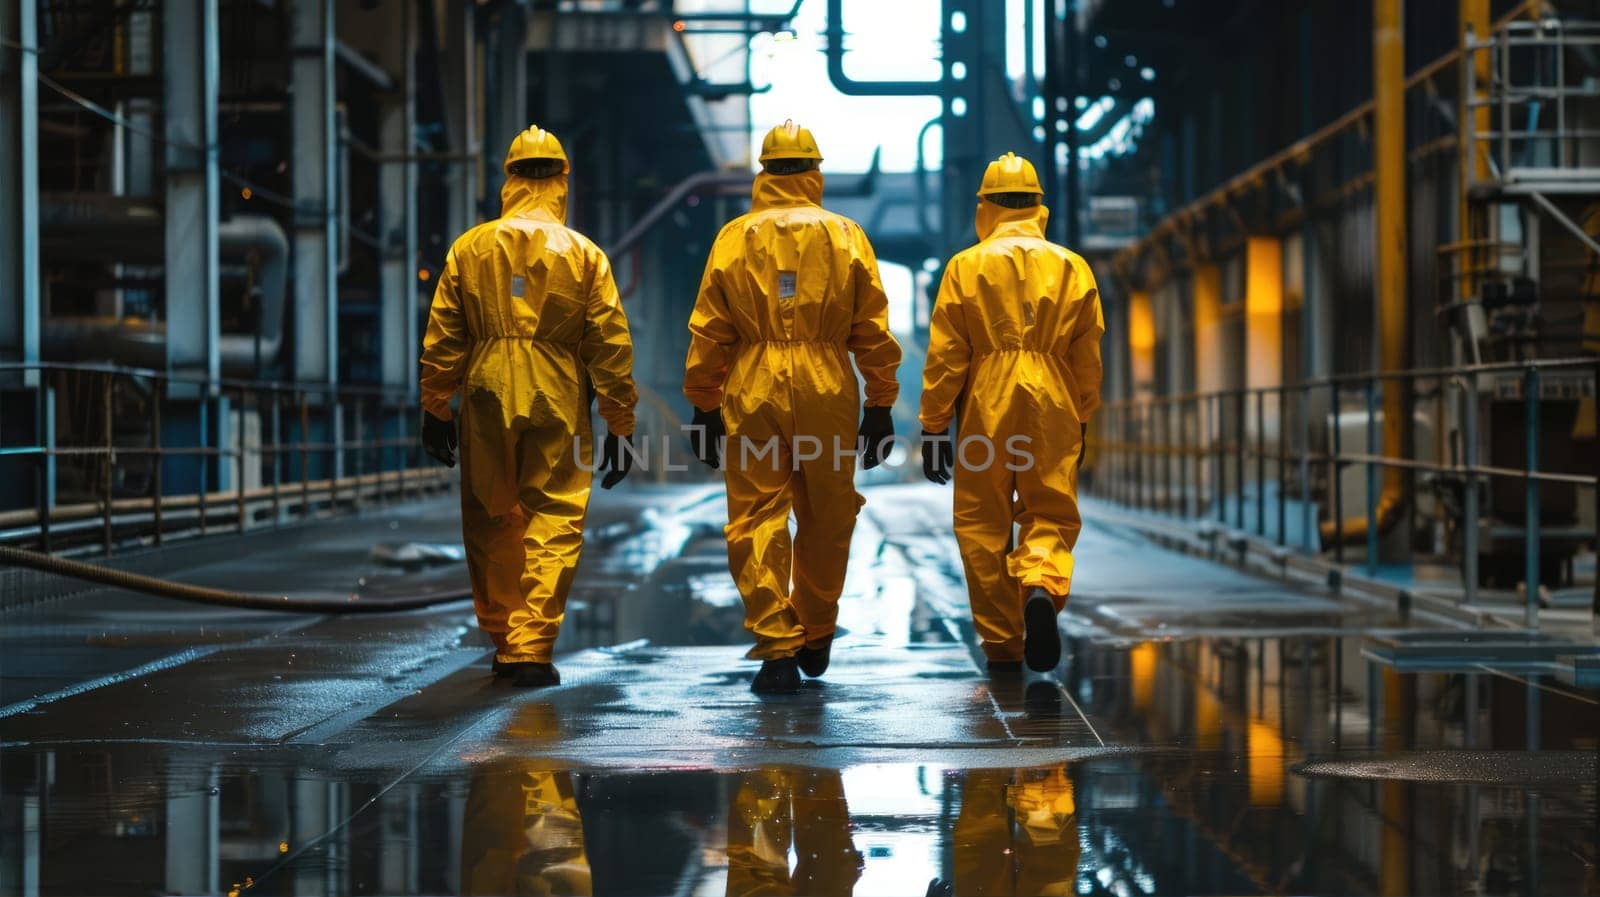 Workers in yellow hazmat suits walking down a hallway by natali_brill